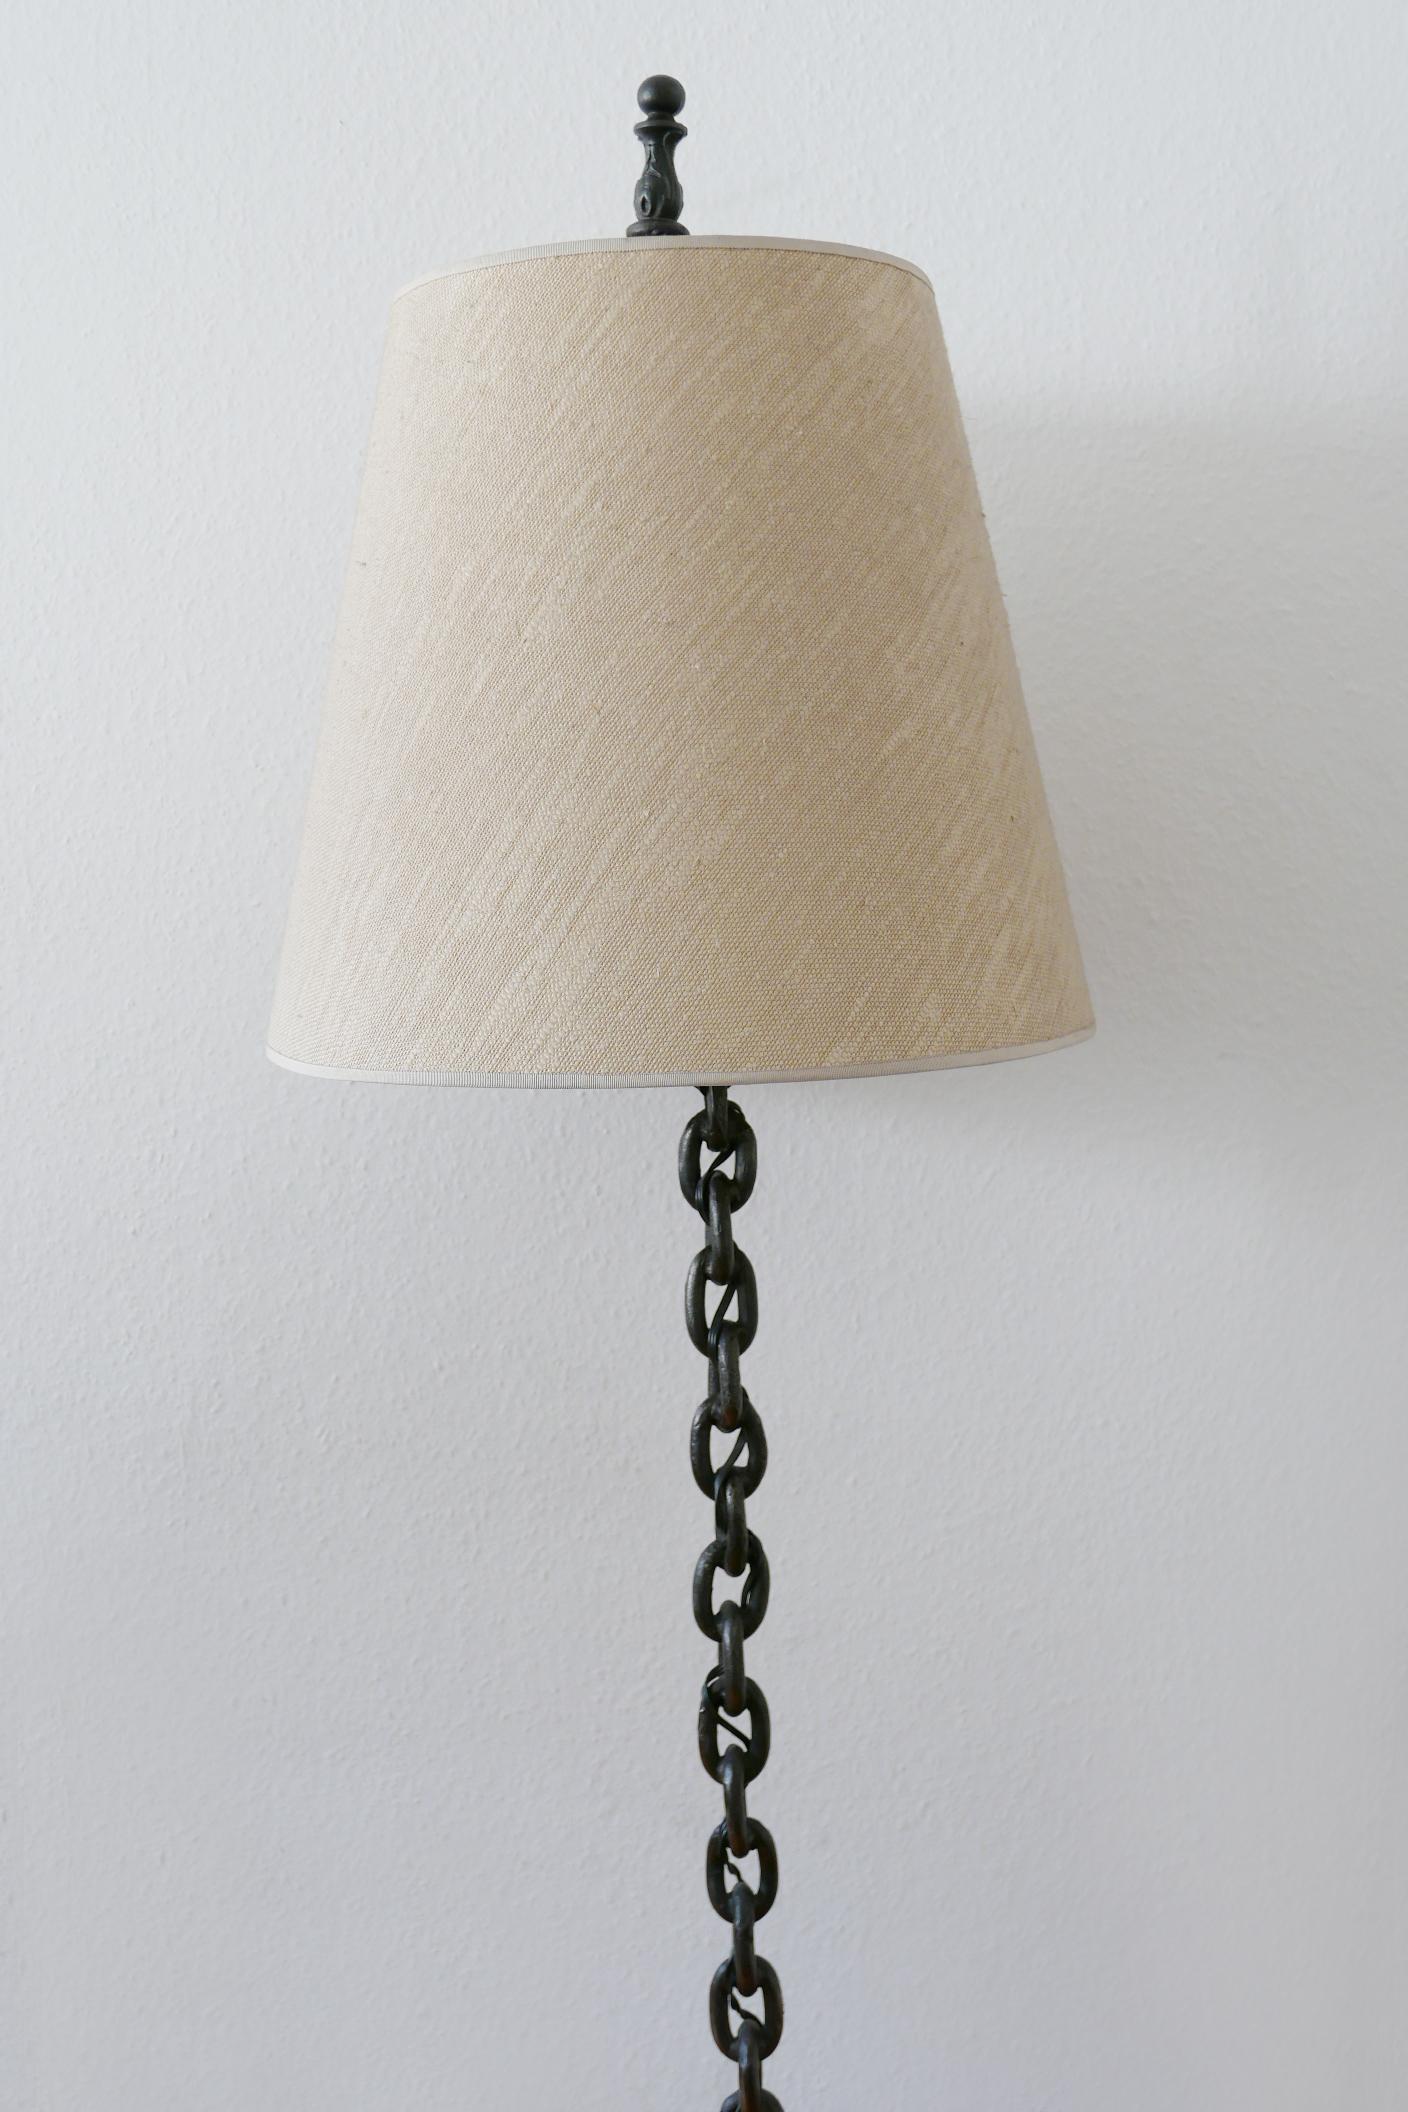 Mid-Century Modern Franz West Style Wrought Iron Chain Floor Lamp 1960s, Germany For Sale 1